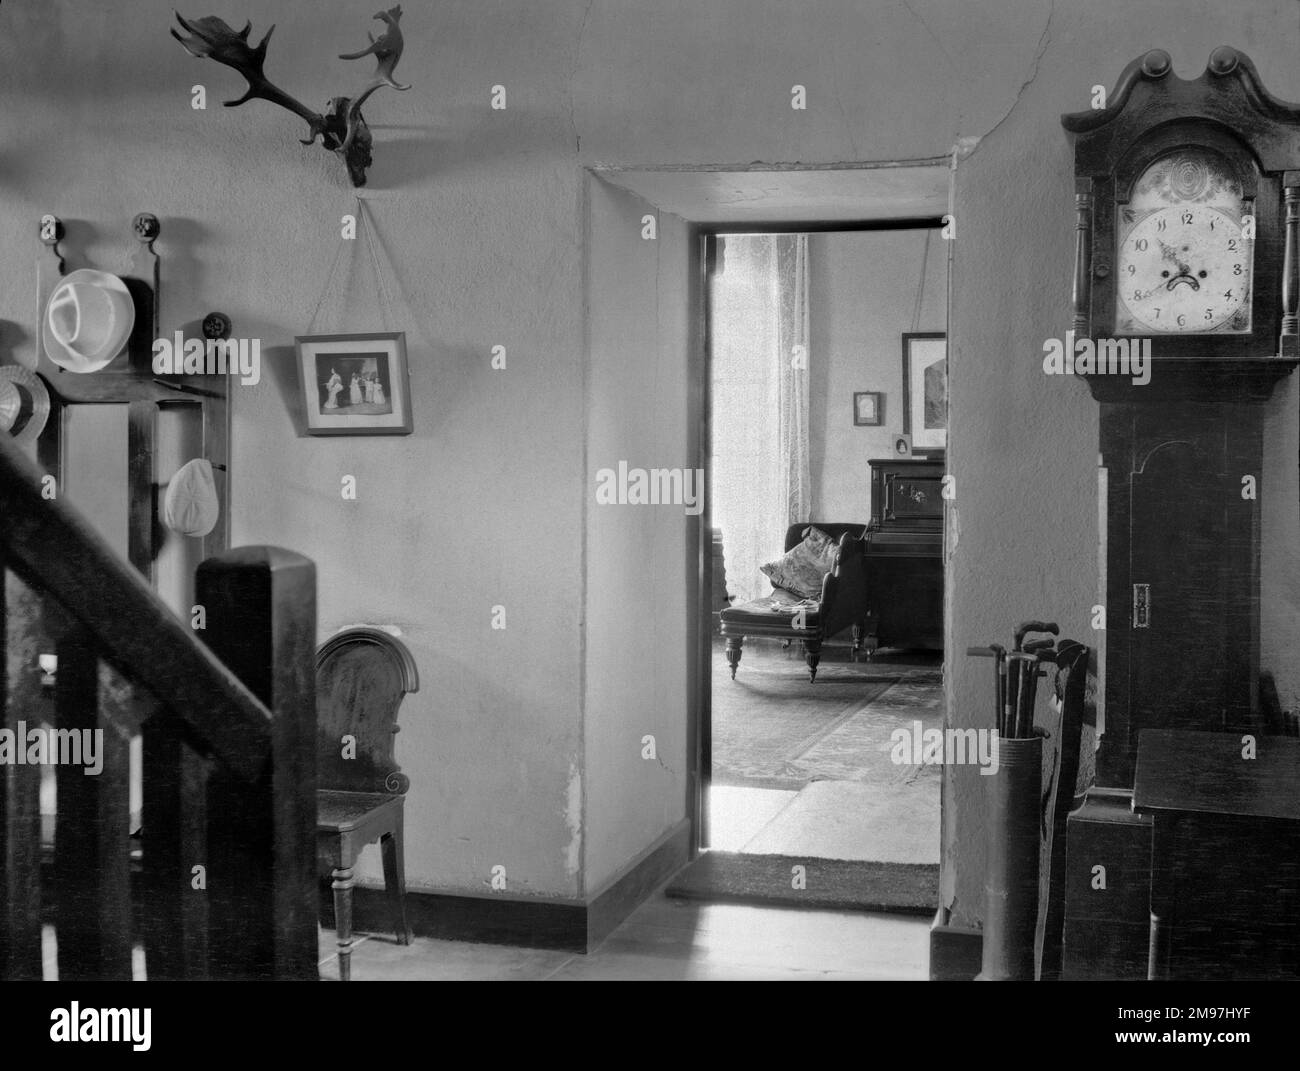 House interior showing a hallway with grandfather clock, antlers, walking sticks, hats on a stand, and another room beyond with chaise longue and piano. Stock Photo